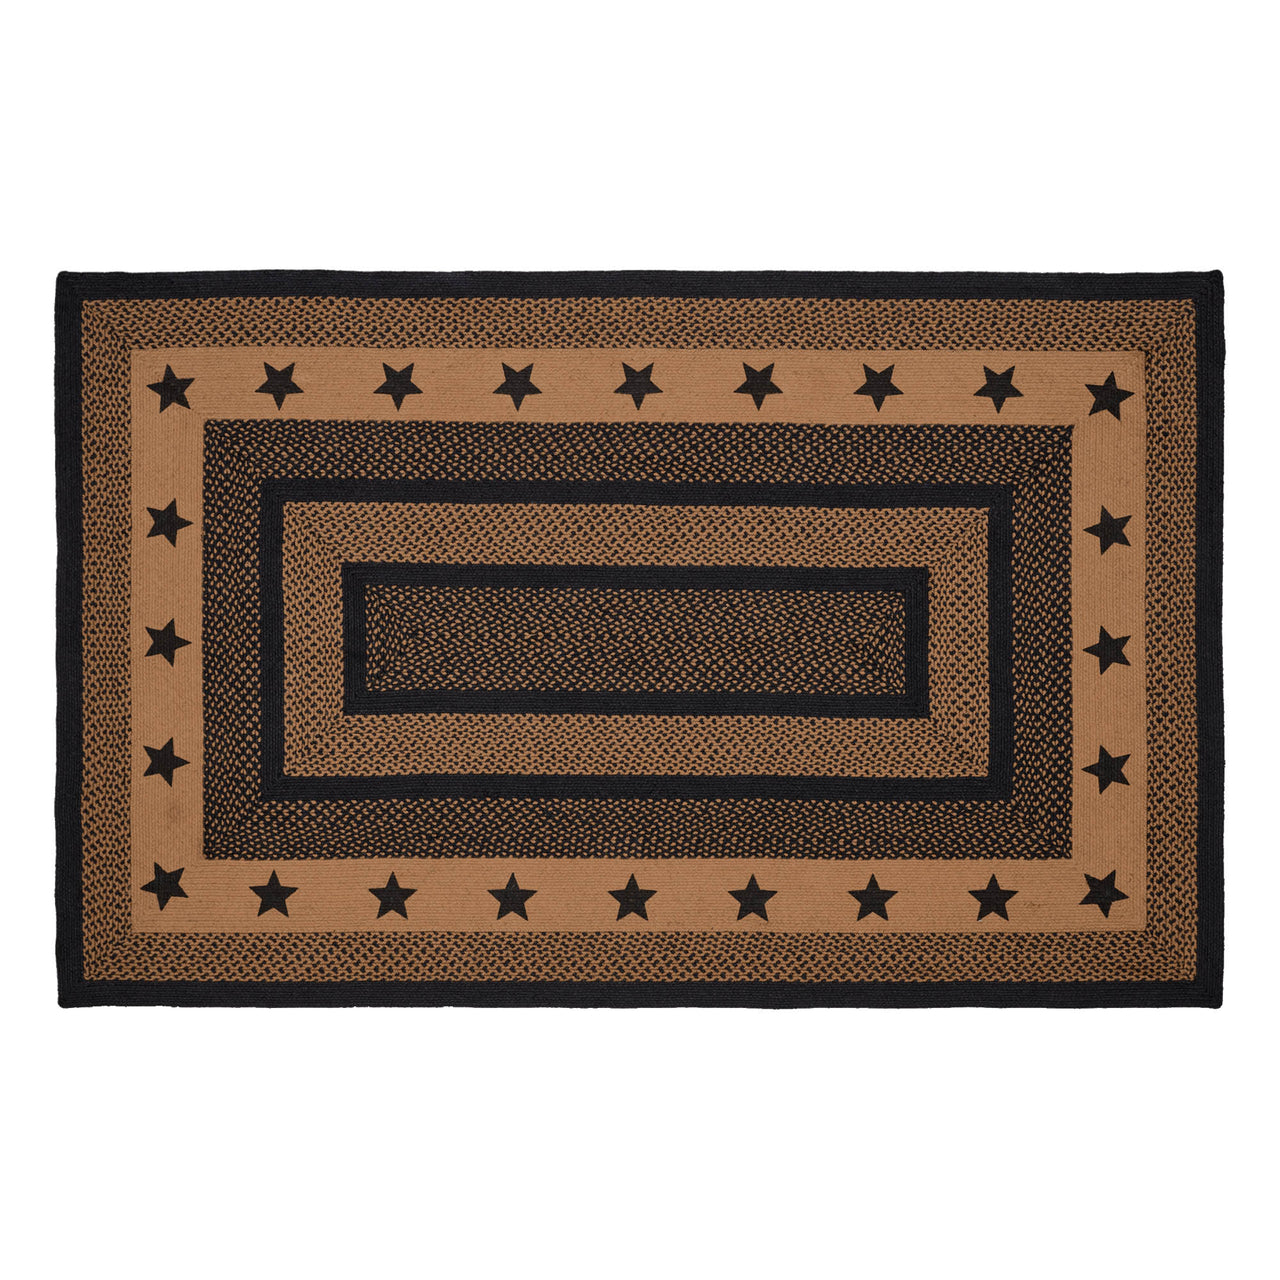 Farmhouse Jute Braided Rug Rect. Stencil Stars with Rug Pad 3'x5' VHC Brands